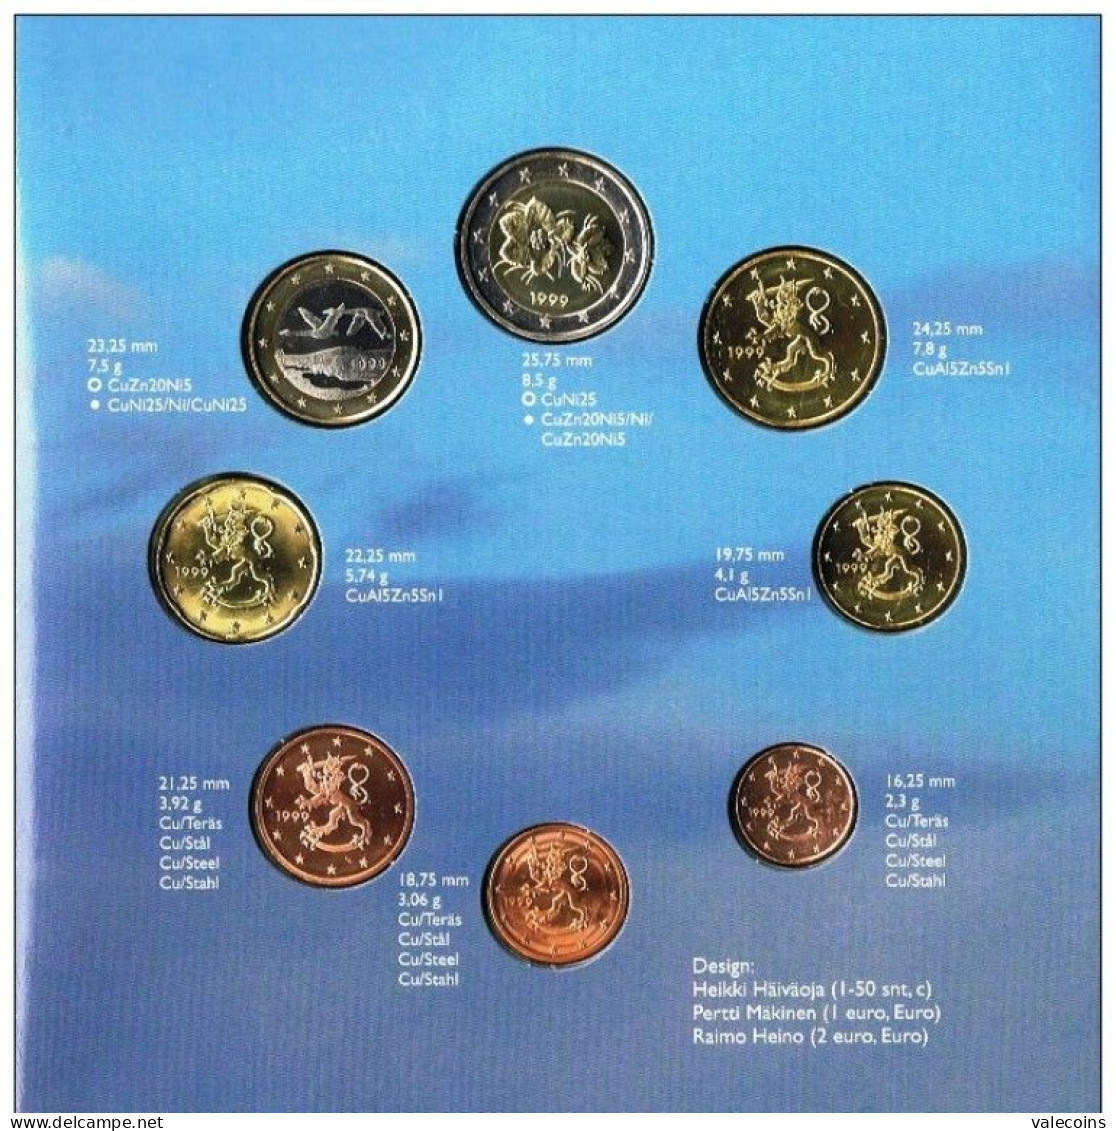 FINLANDIA SUOMI FINLAND FINNLAND - 24 COINS - KMS OFFICIAL ISSUE 1999-2000-2001 YEAR SET - LIMITED ISSUE - Finland